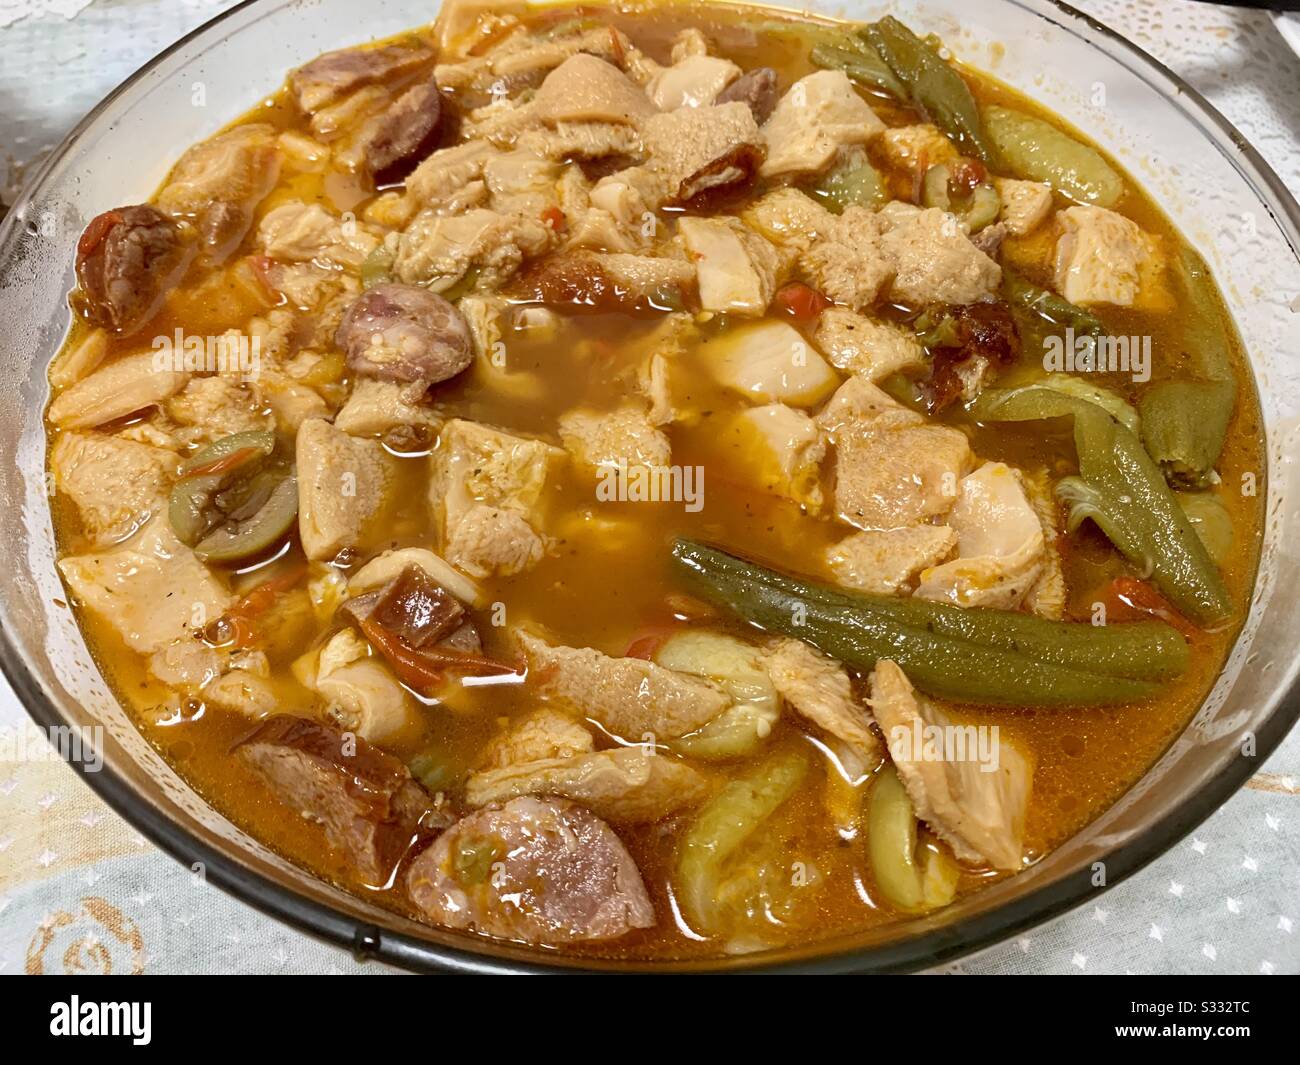 Dobradinha (Brazilian Portuguese) or dobrada (European Portuguese) is the name given, in cooking, to animal tripe, especially ox, cooked in small pieces with a wide variety of condiments. Stock Photo